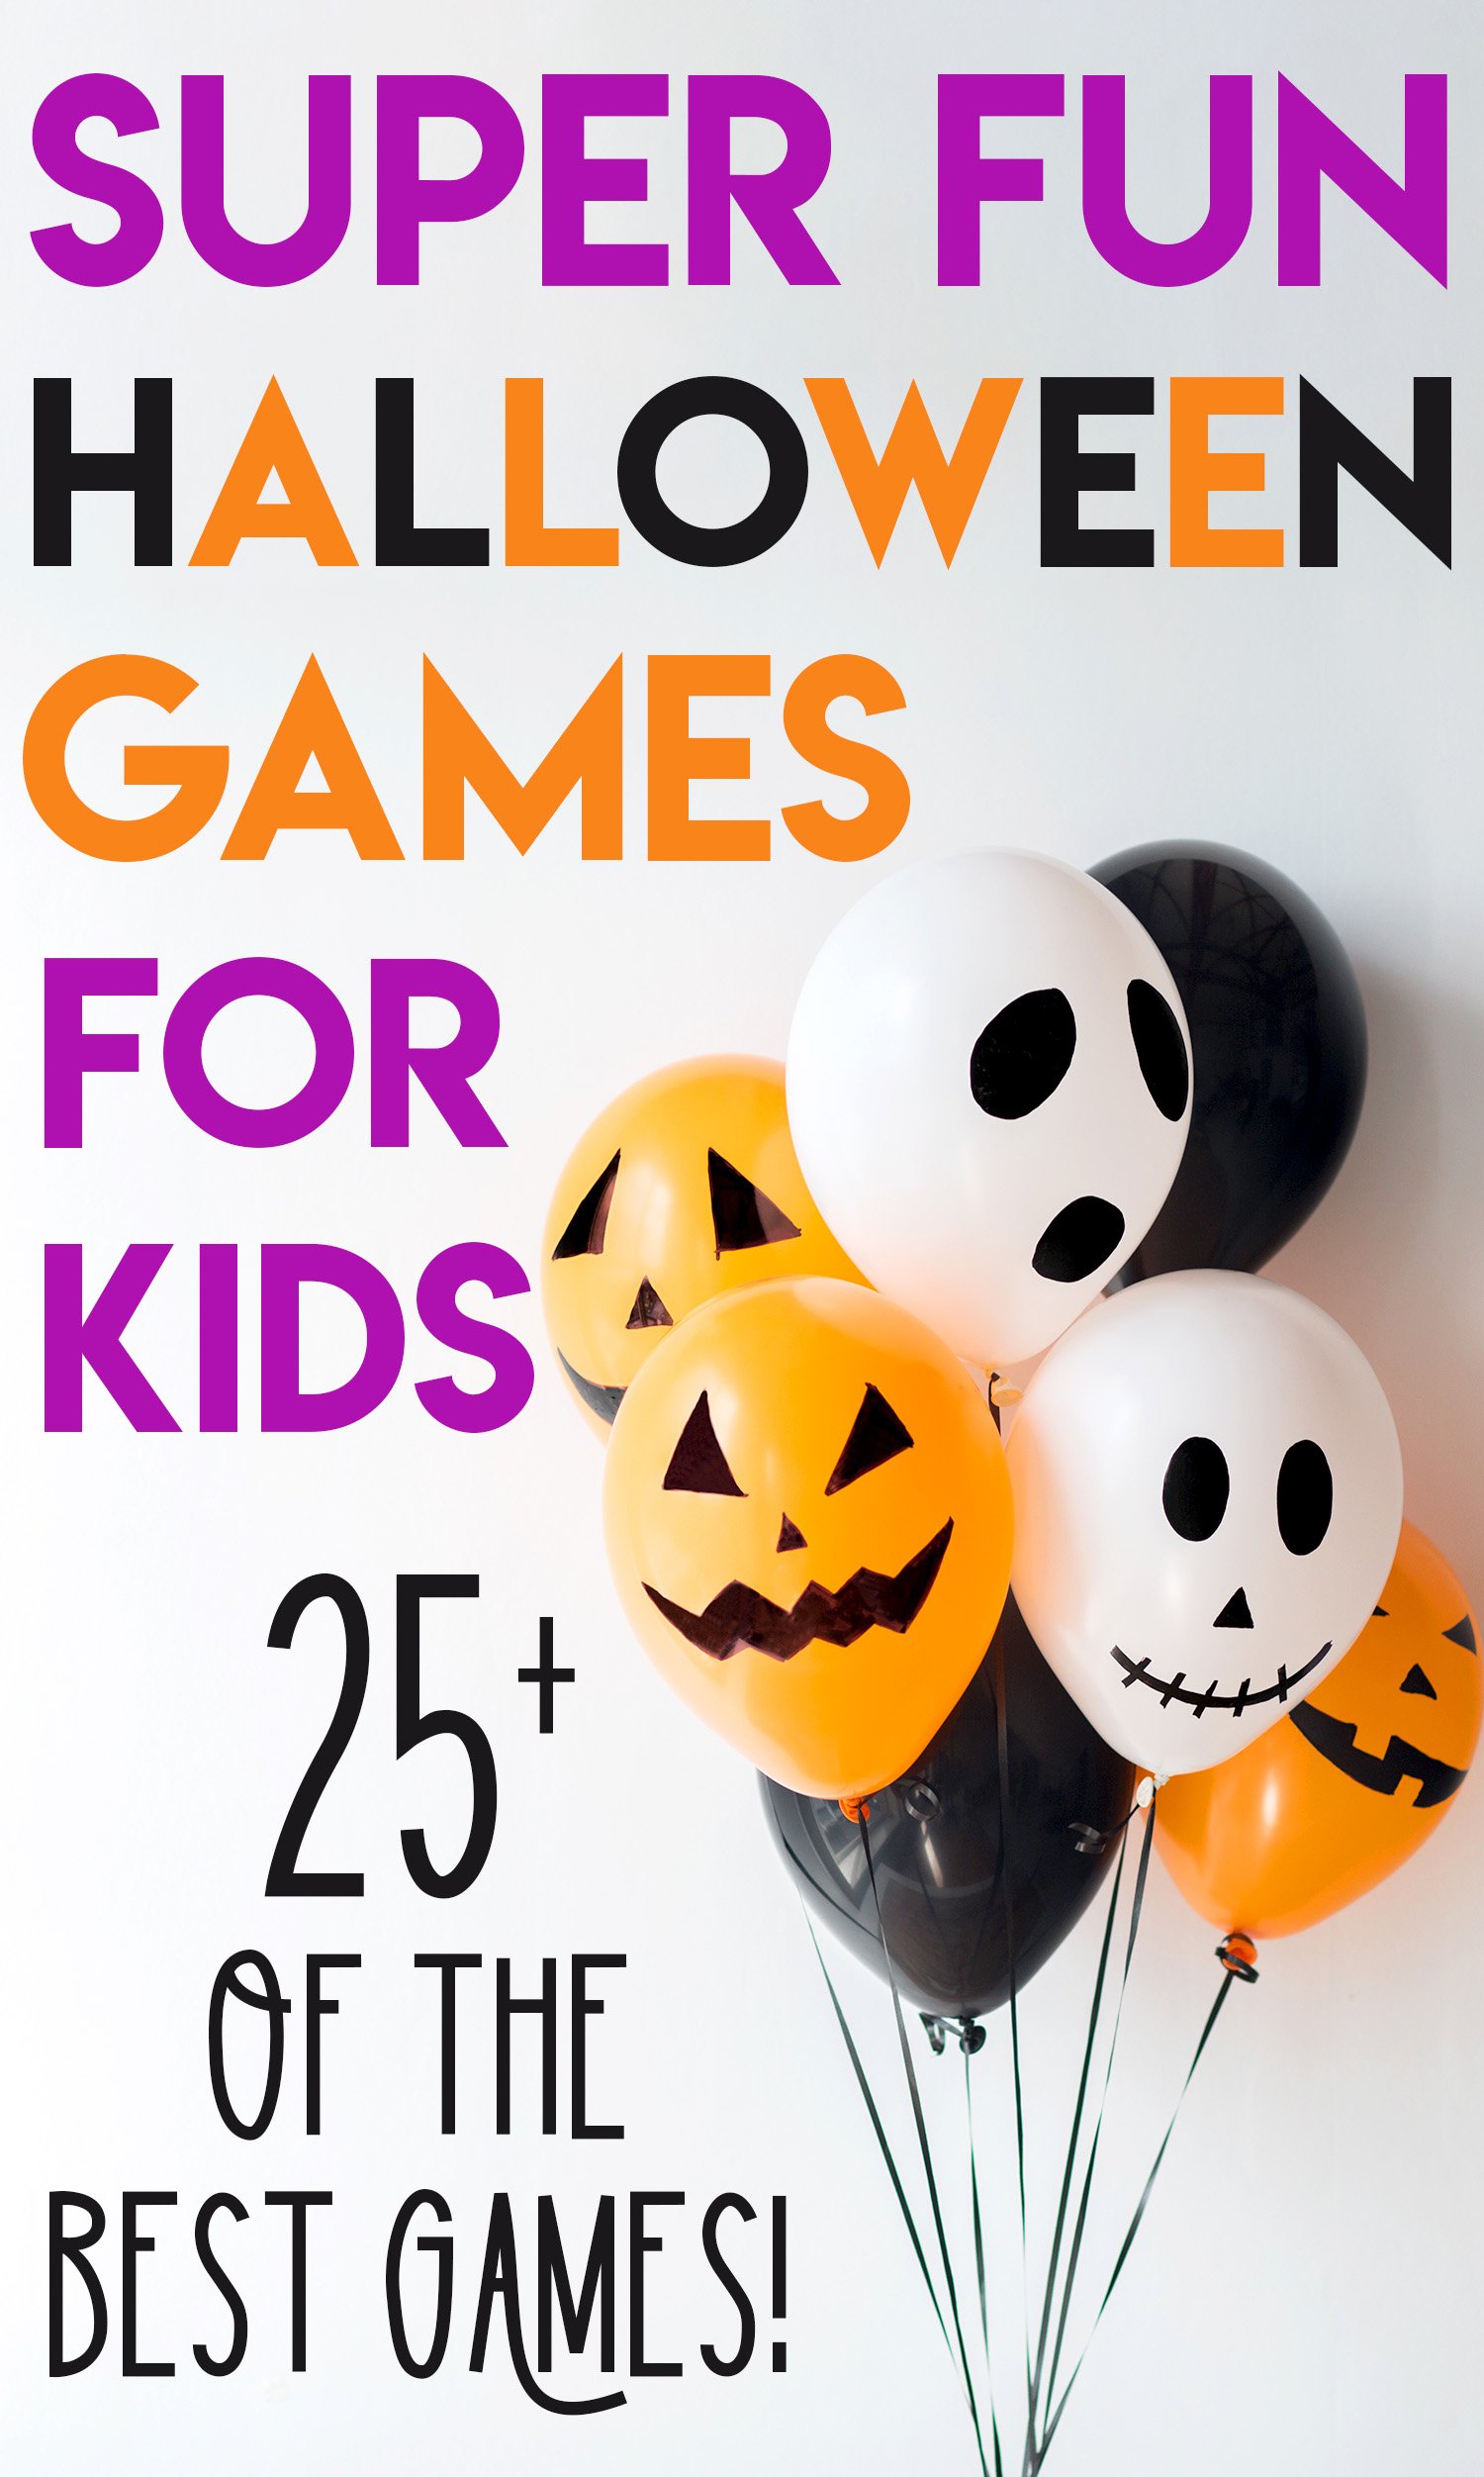 Fun Halloween Games for Kids - Halloween Party Games for Kids